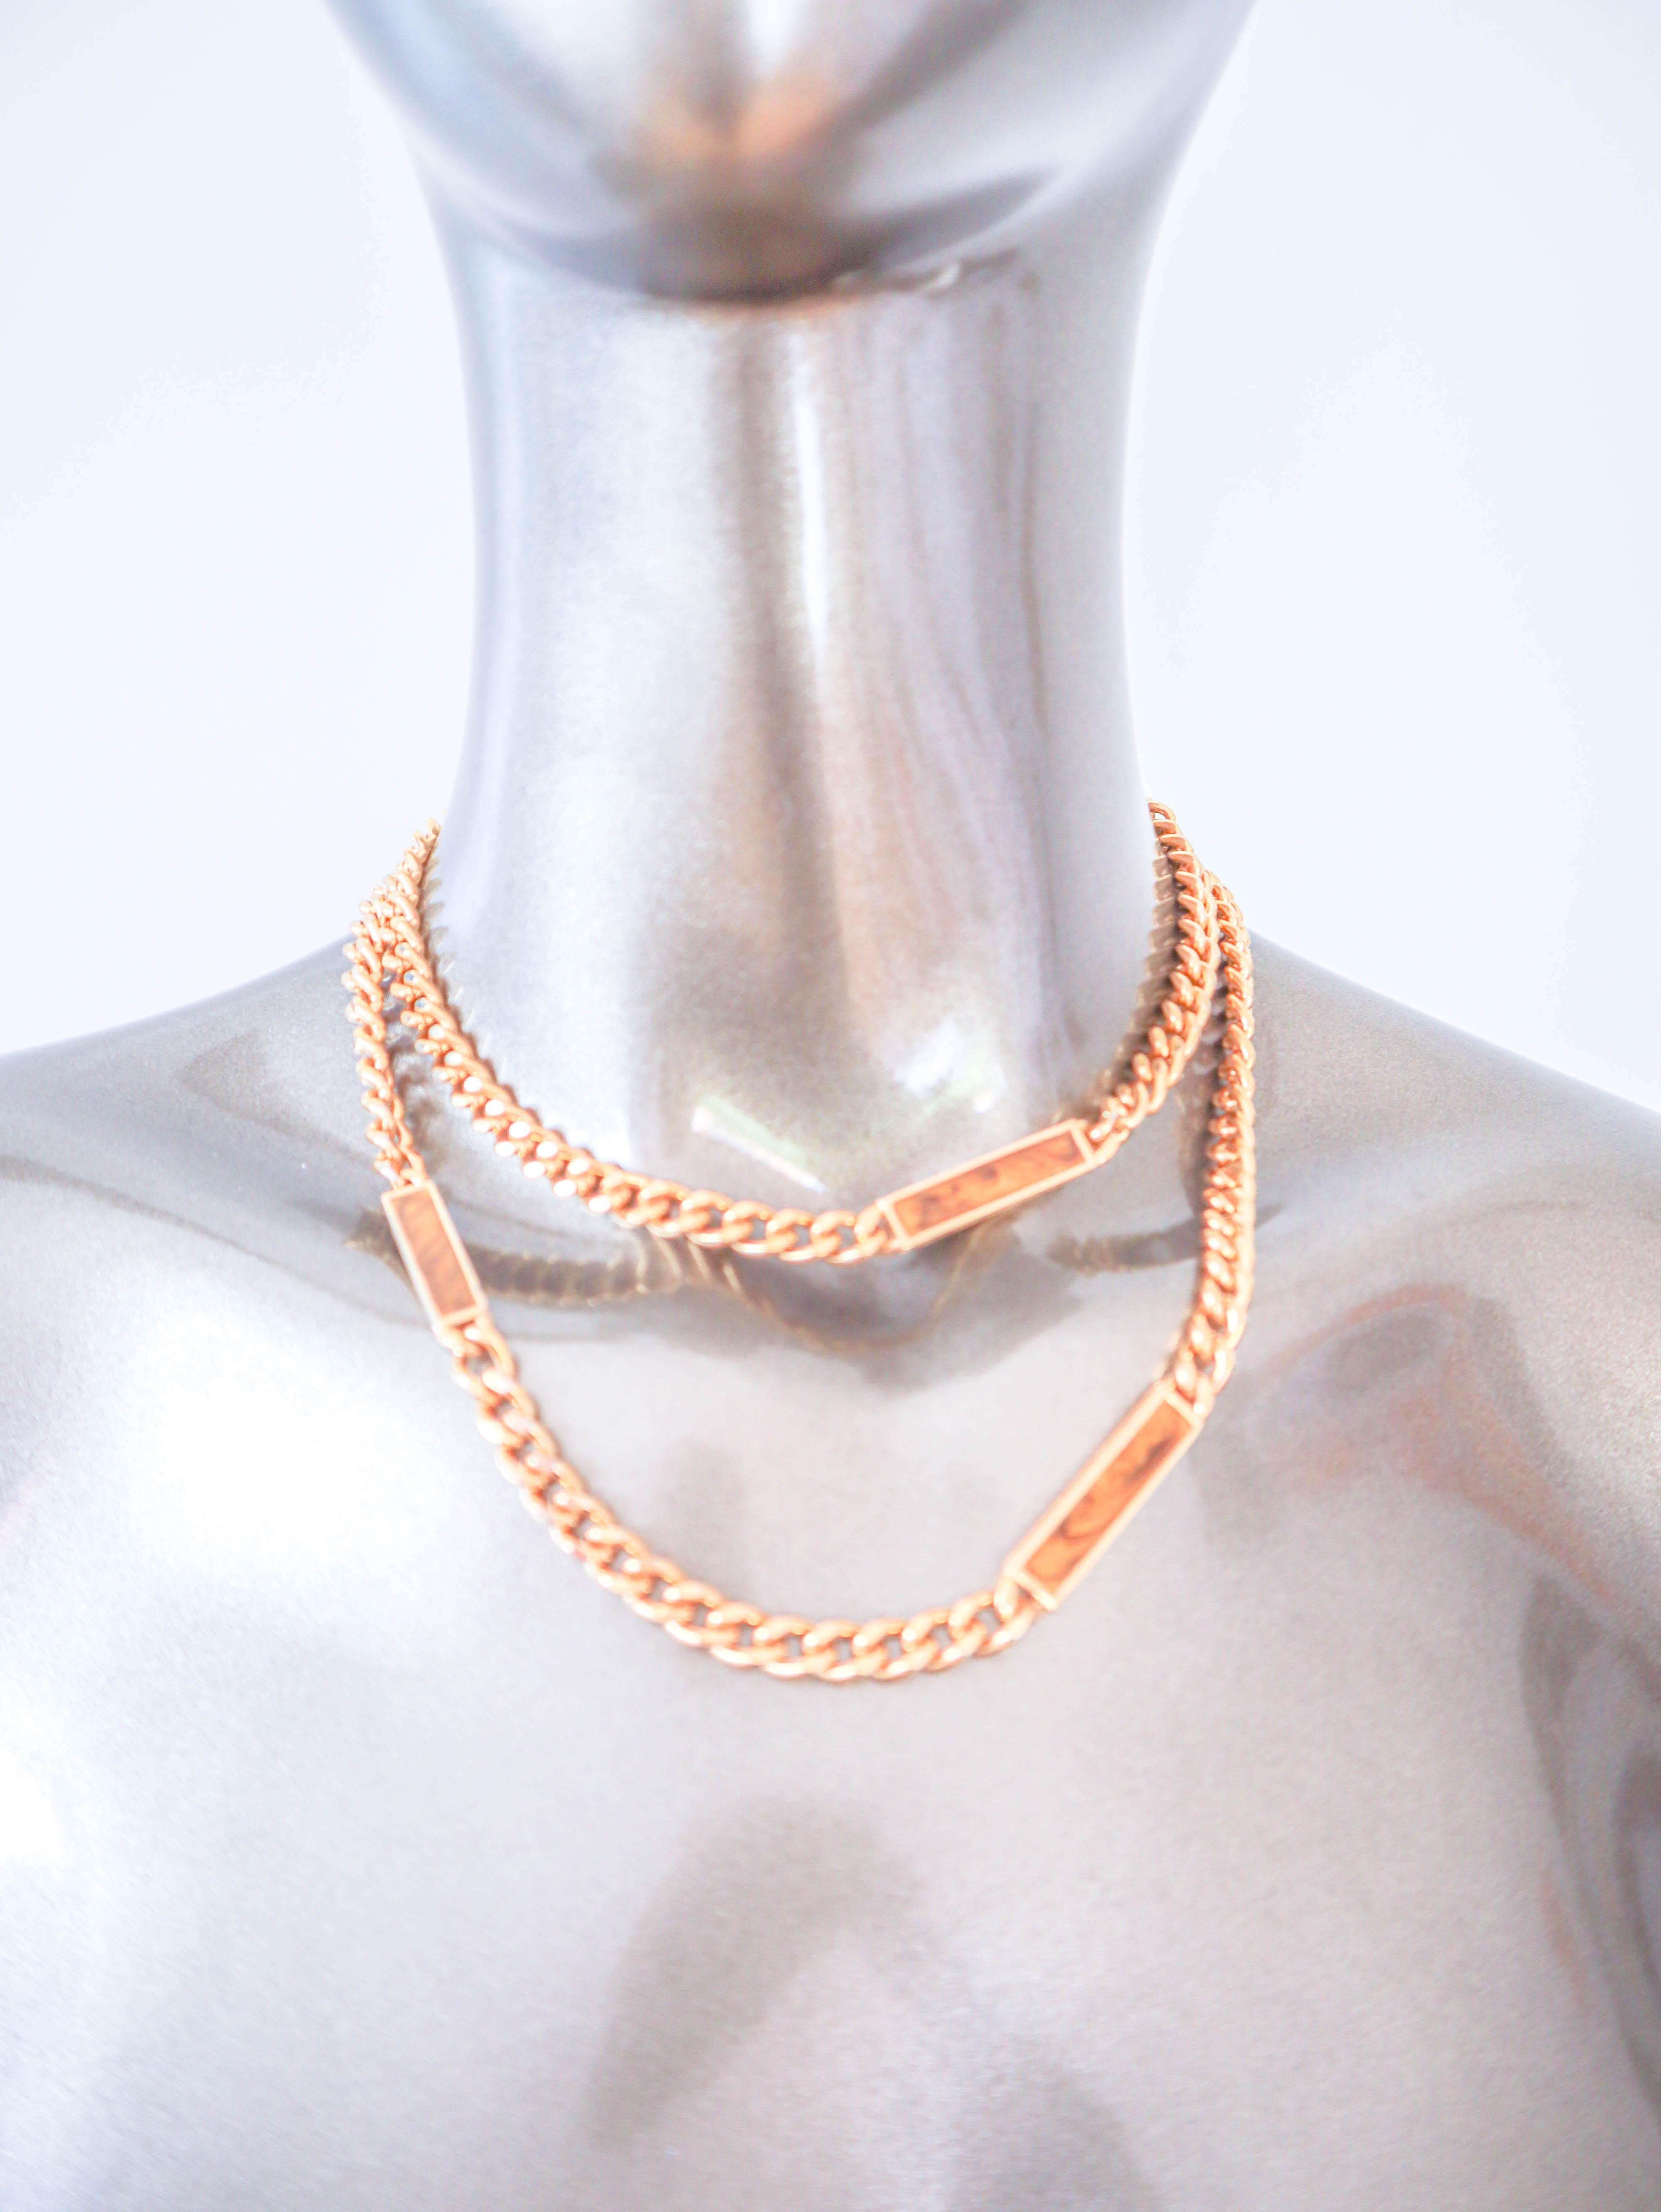 1980's Givenchy enamel necklace with unique marble print amber, this extra long necklace could be worn multiple ways and easy to mix and match with your outfit.
Feature
Material: Metal & Enamel
Color: Gold
Condition: Excellent
Period: